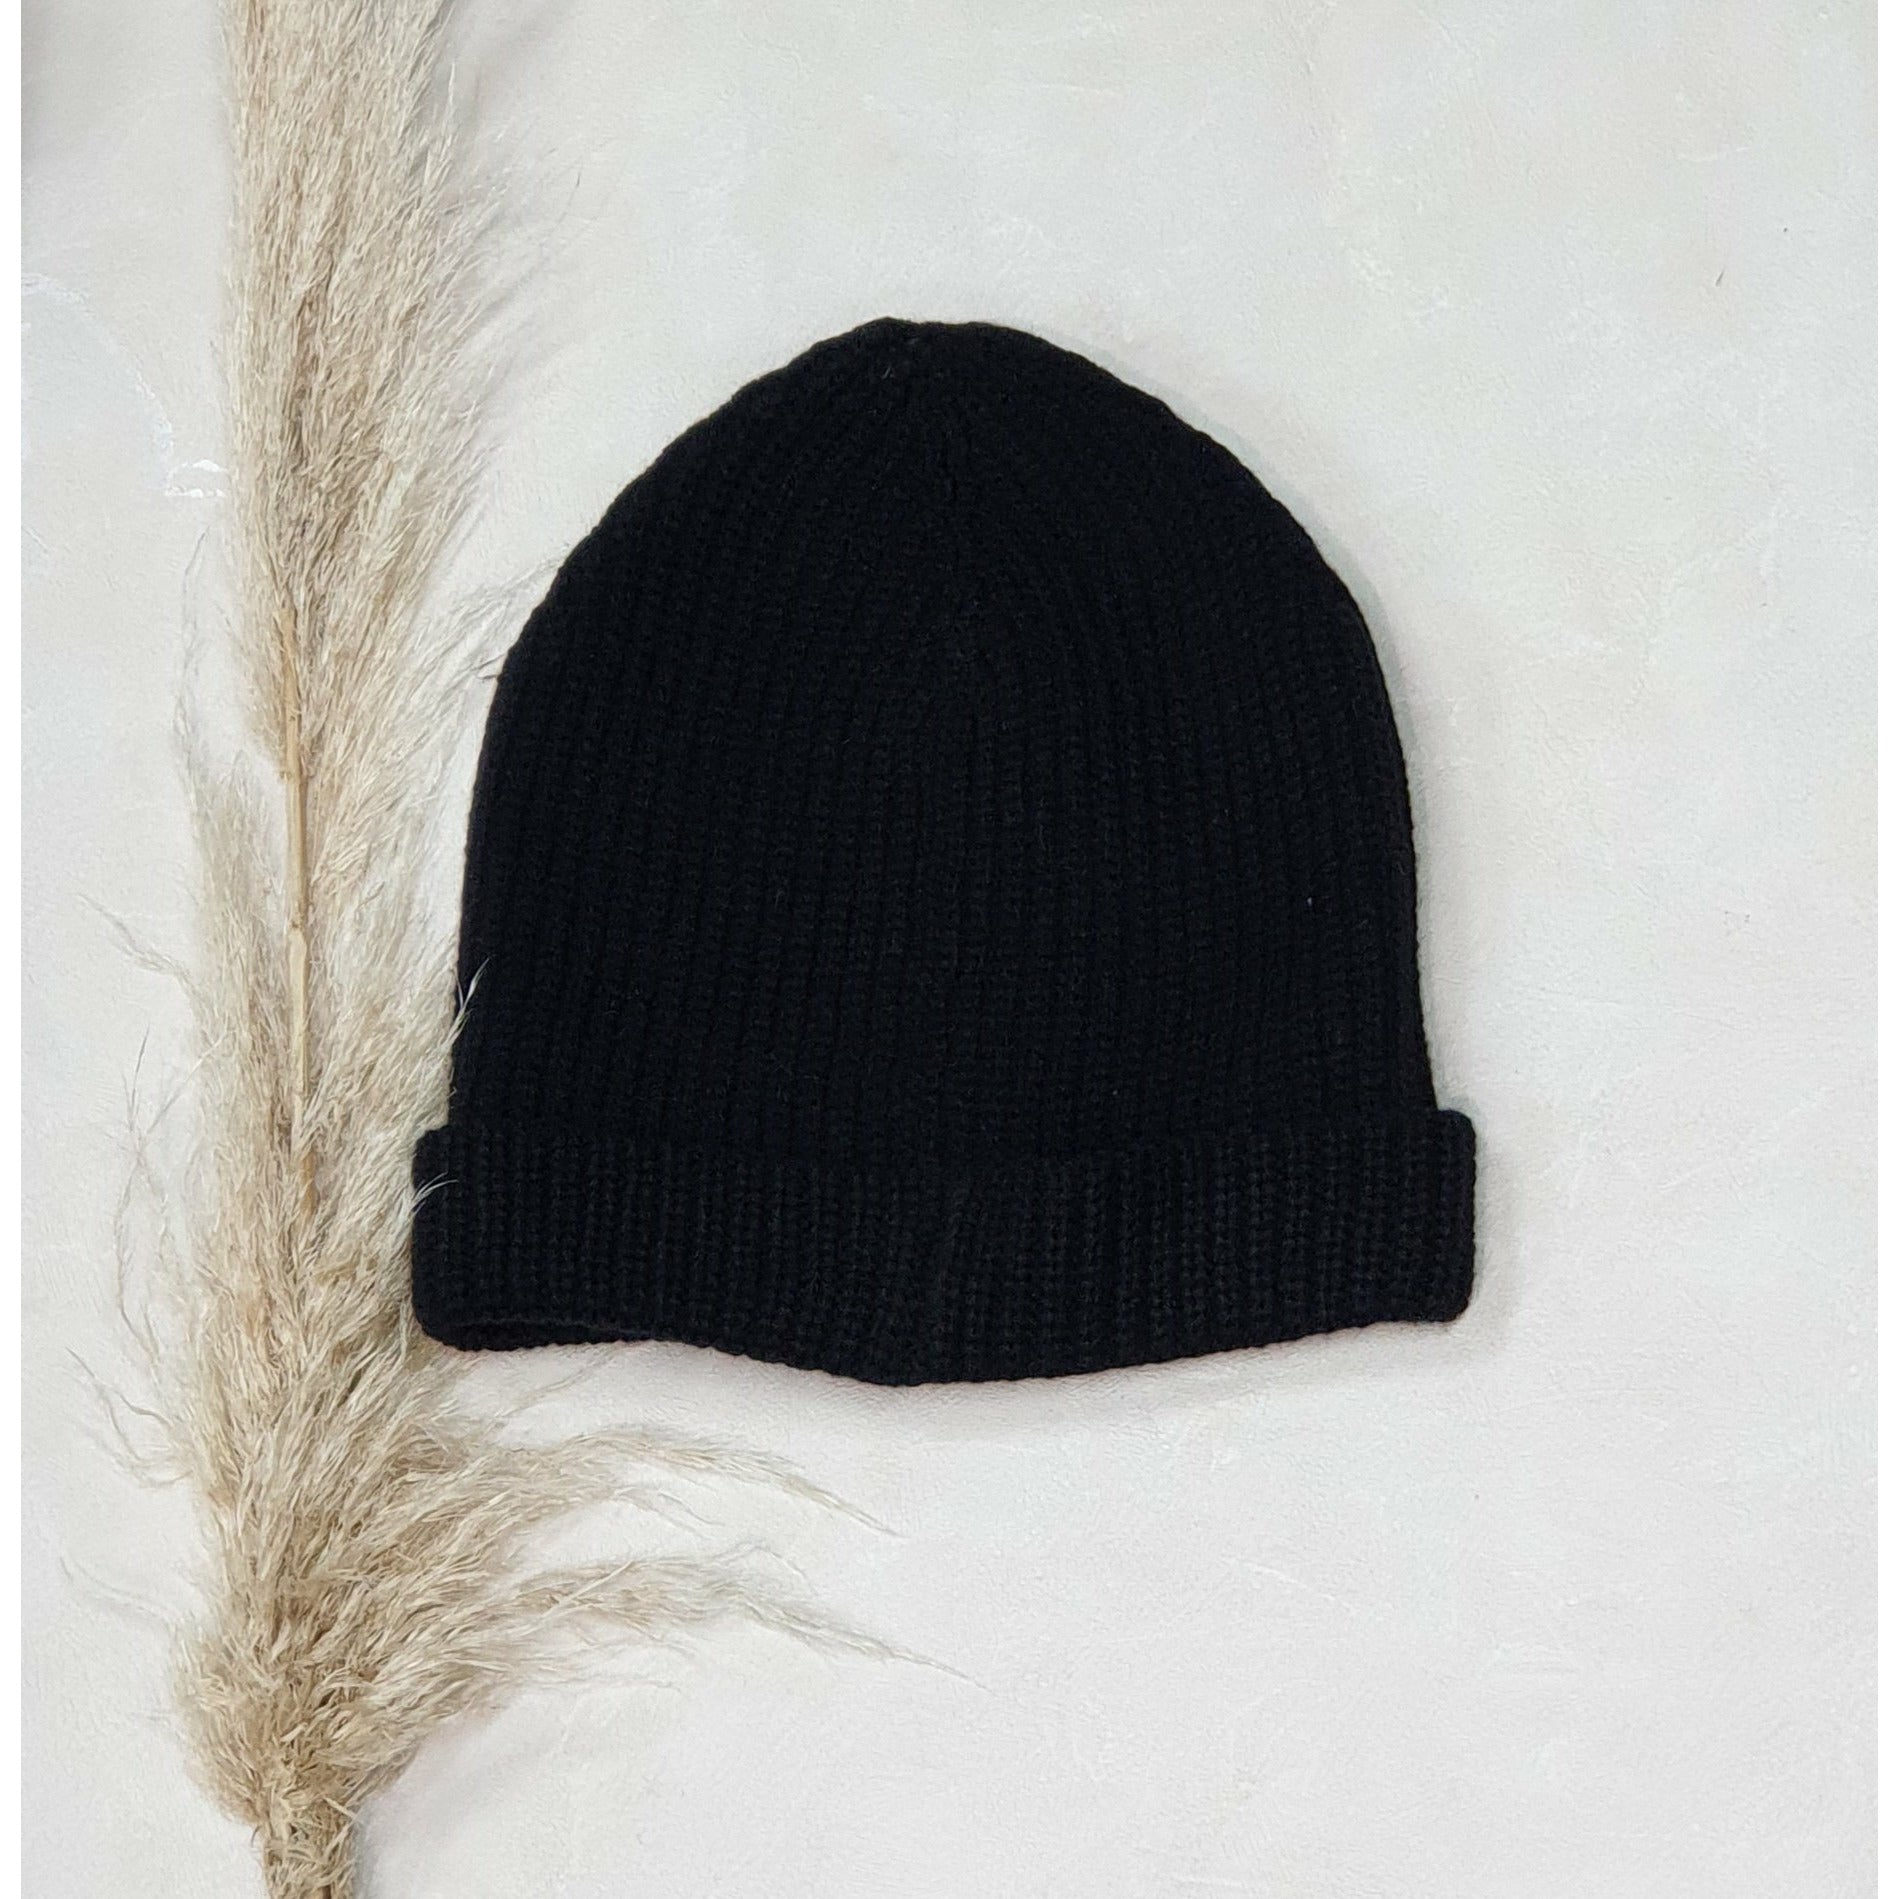 WHARF BEANIE BLACK Not specified